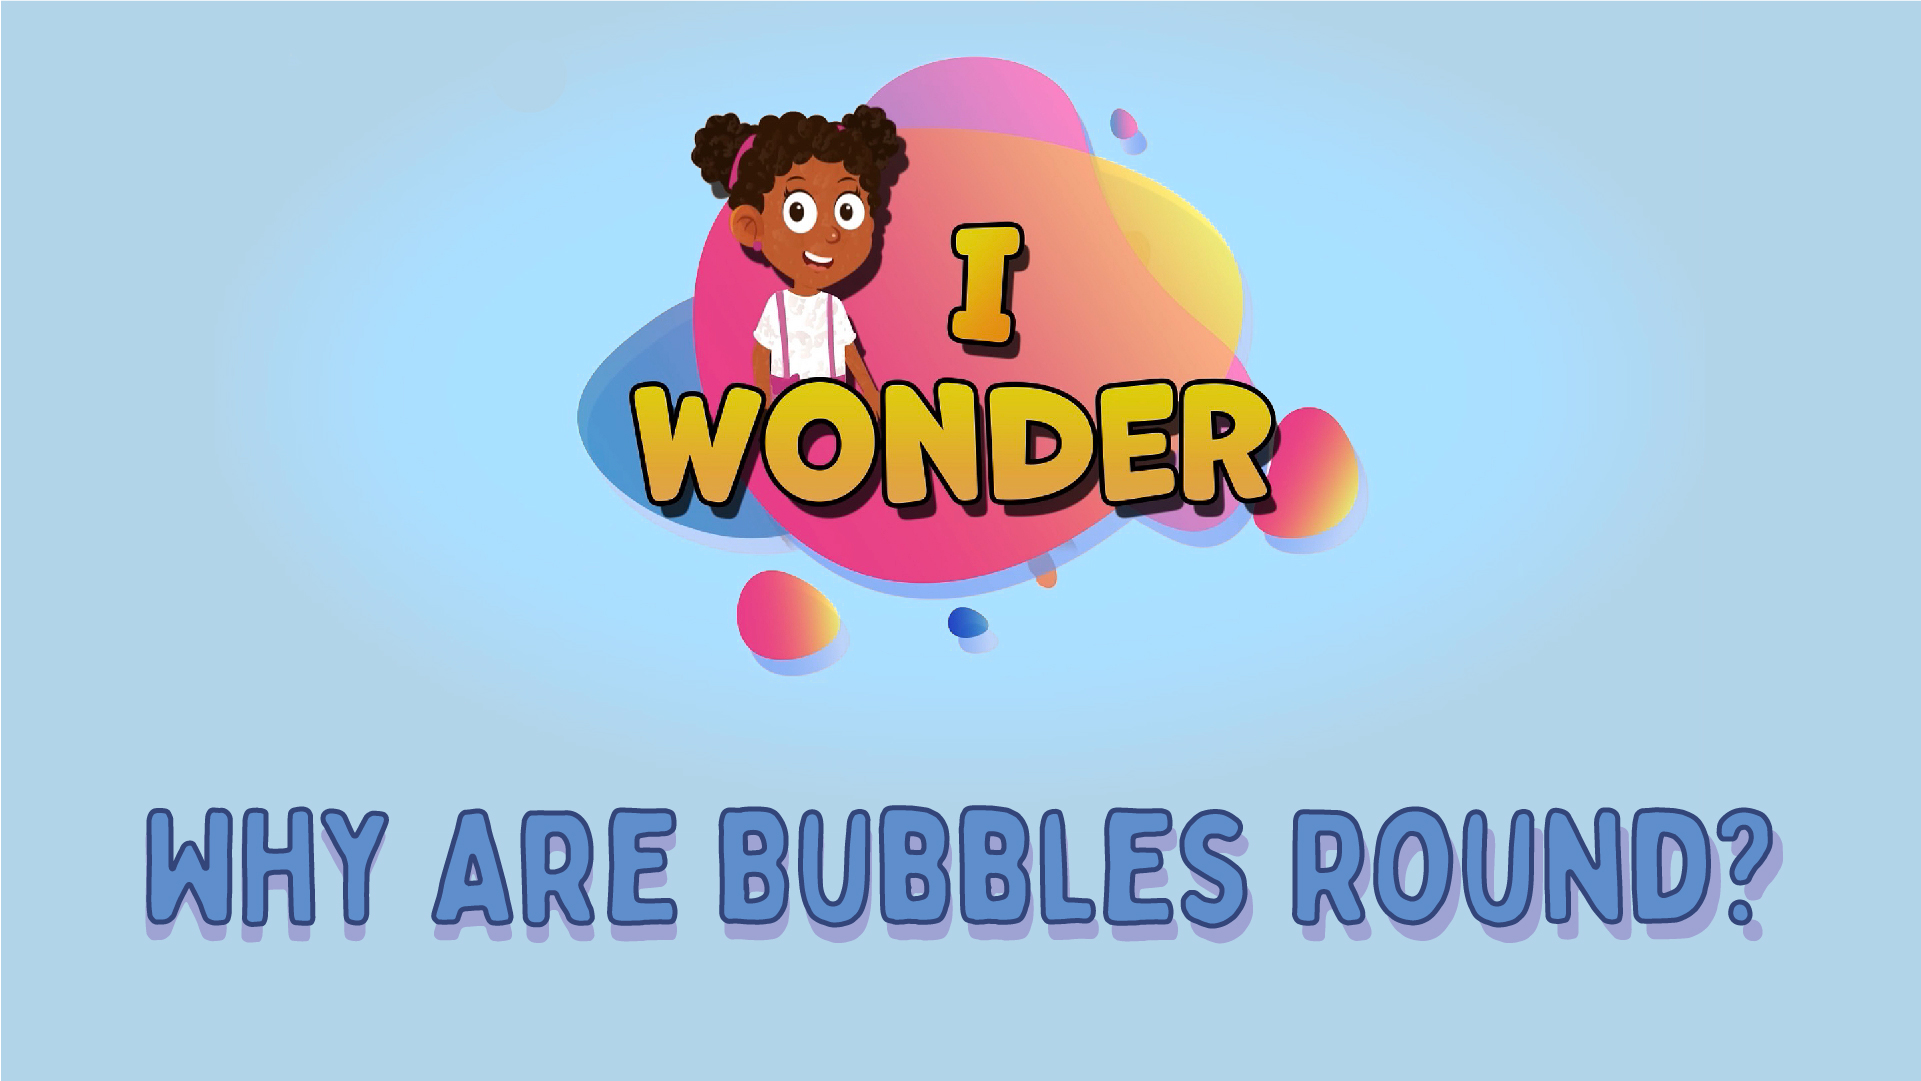 Why Are Bubbles Round?